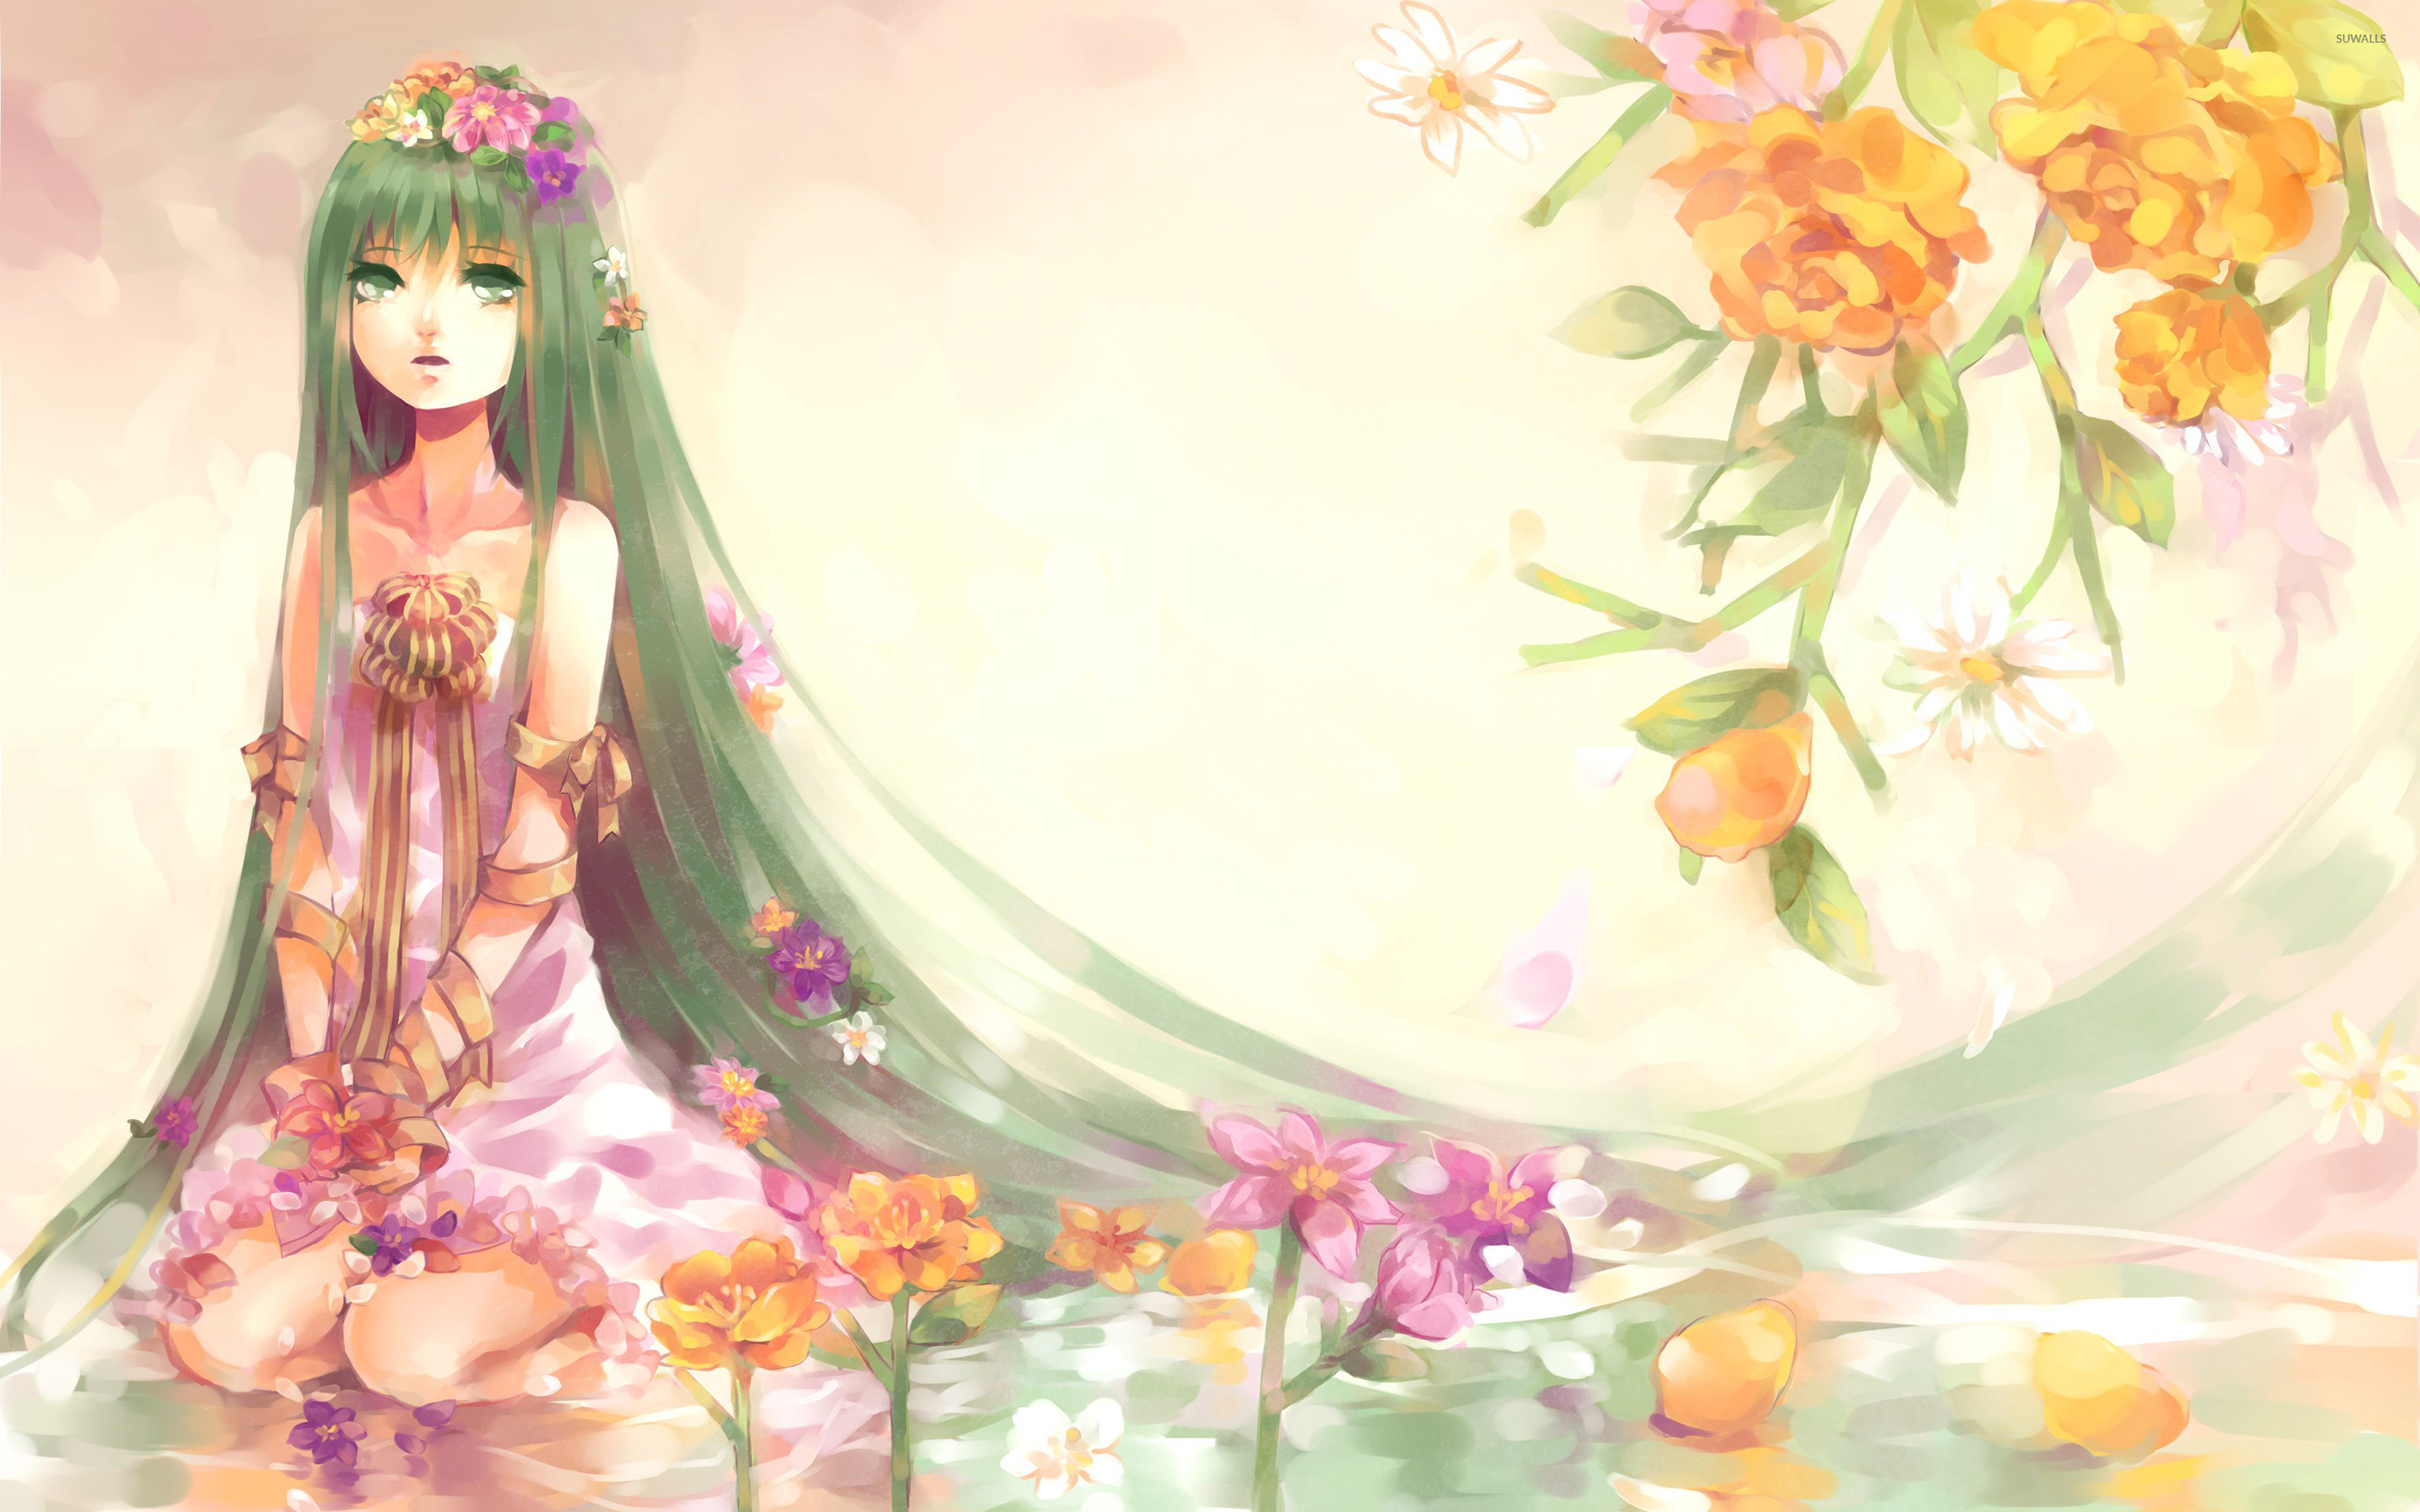 Anime Girl With Flowers - HD Wallpaper 